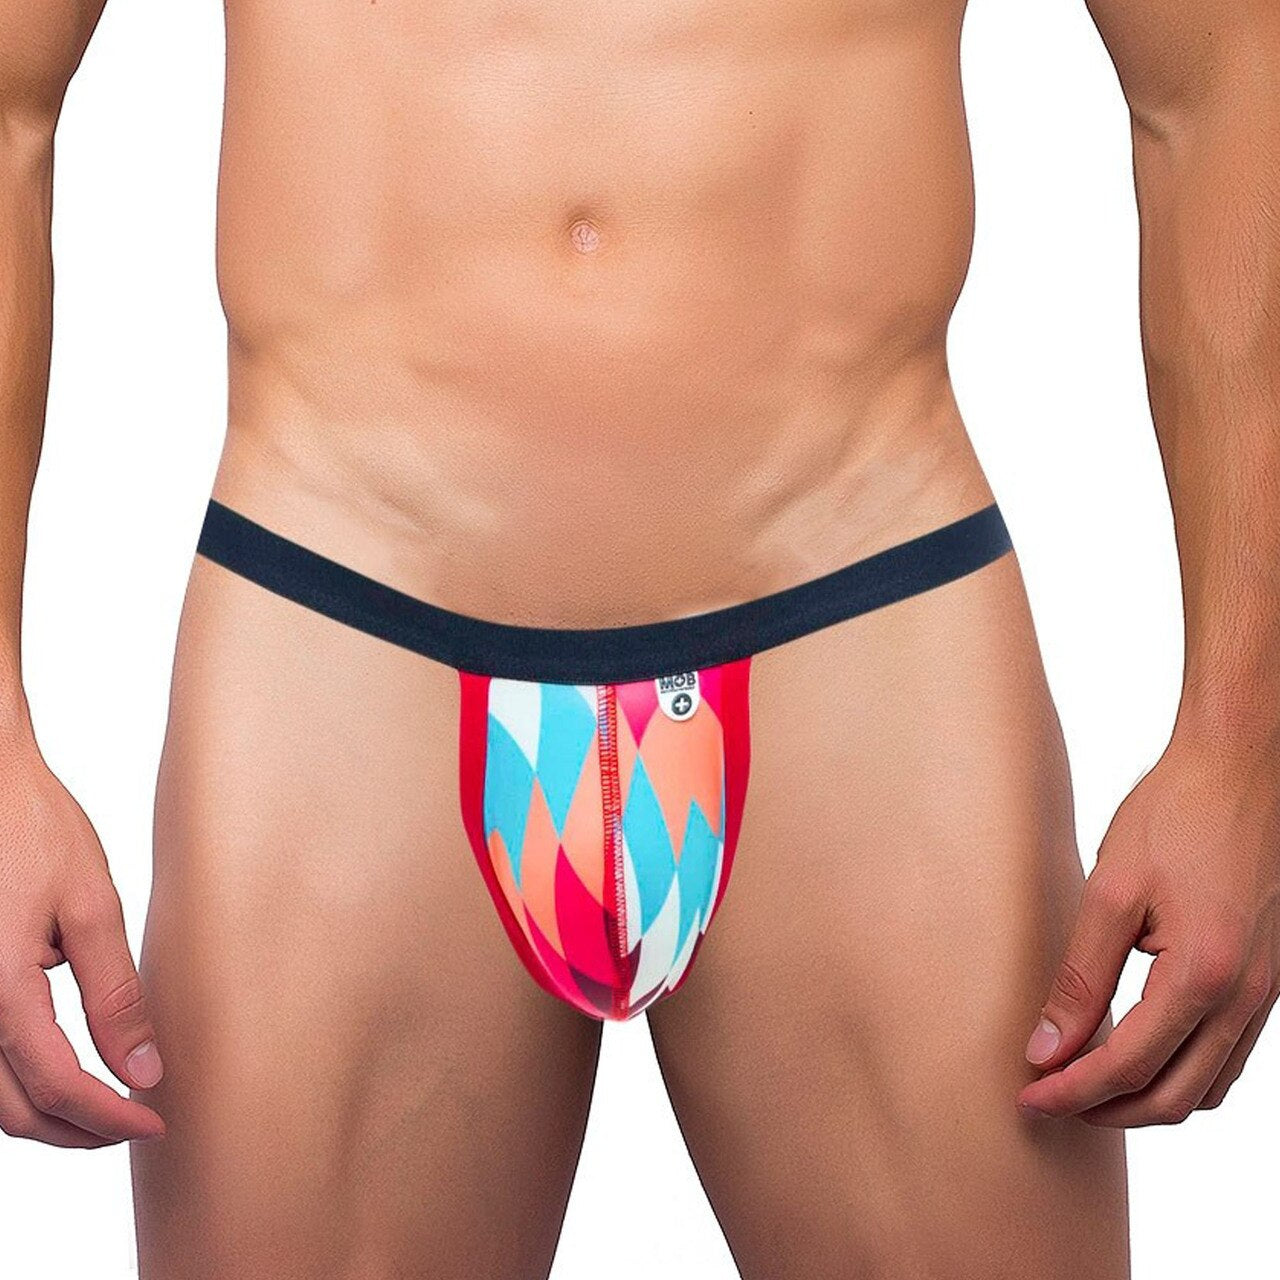 SALE - Mens Male Basics Colourful Pouch G string Rombos